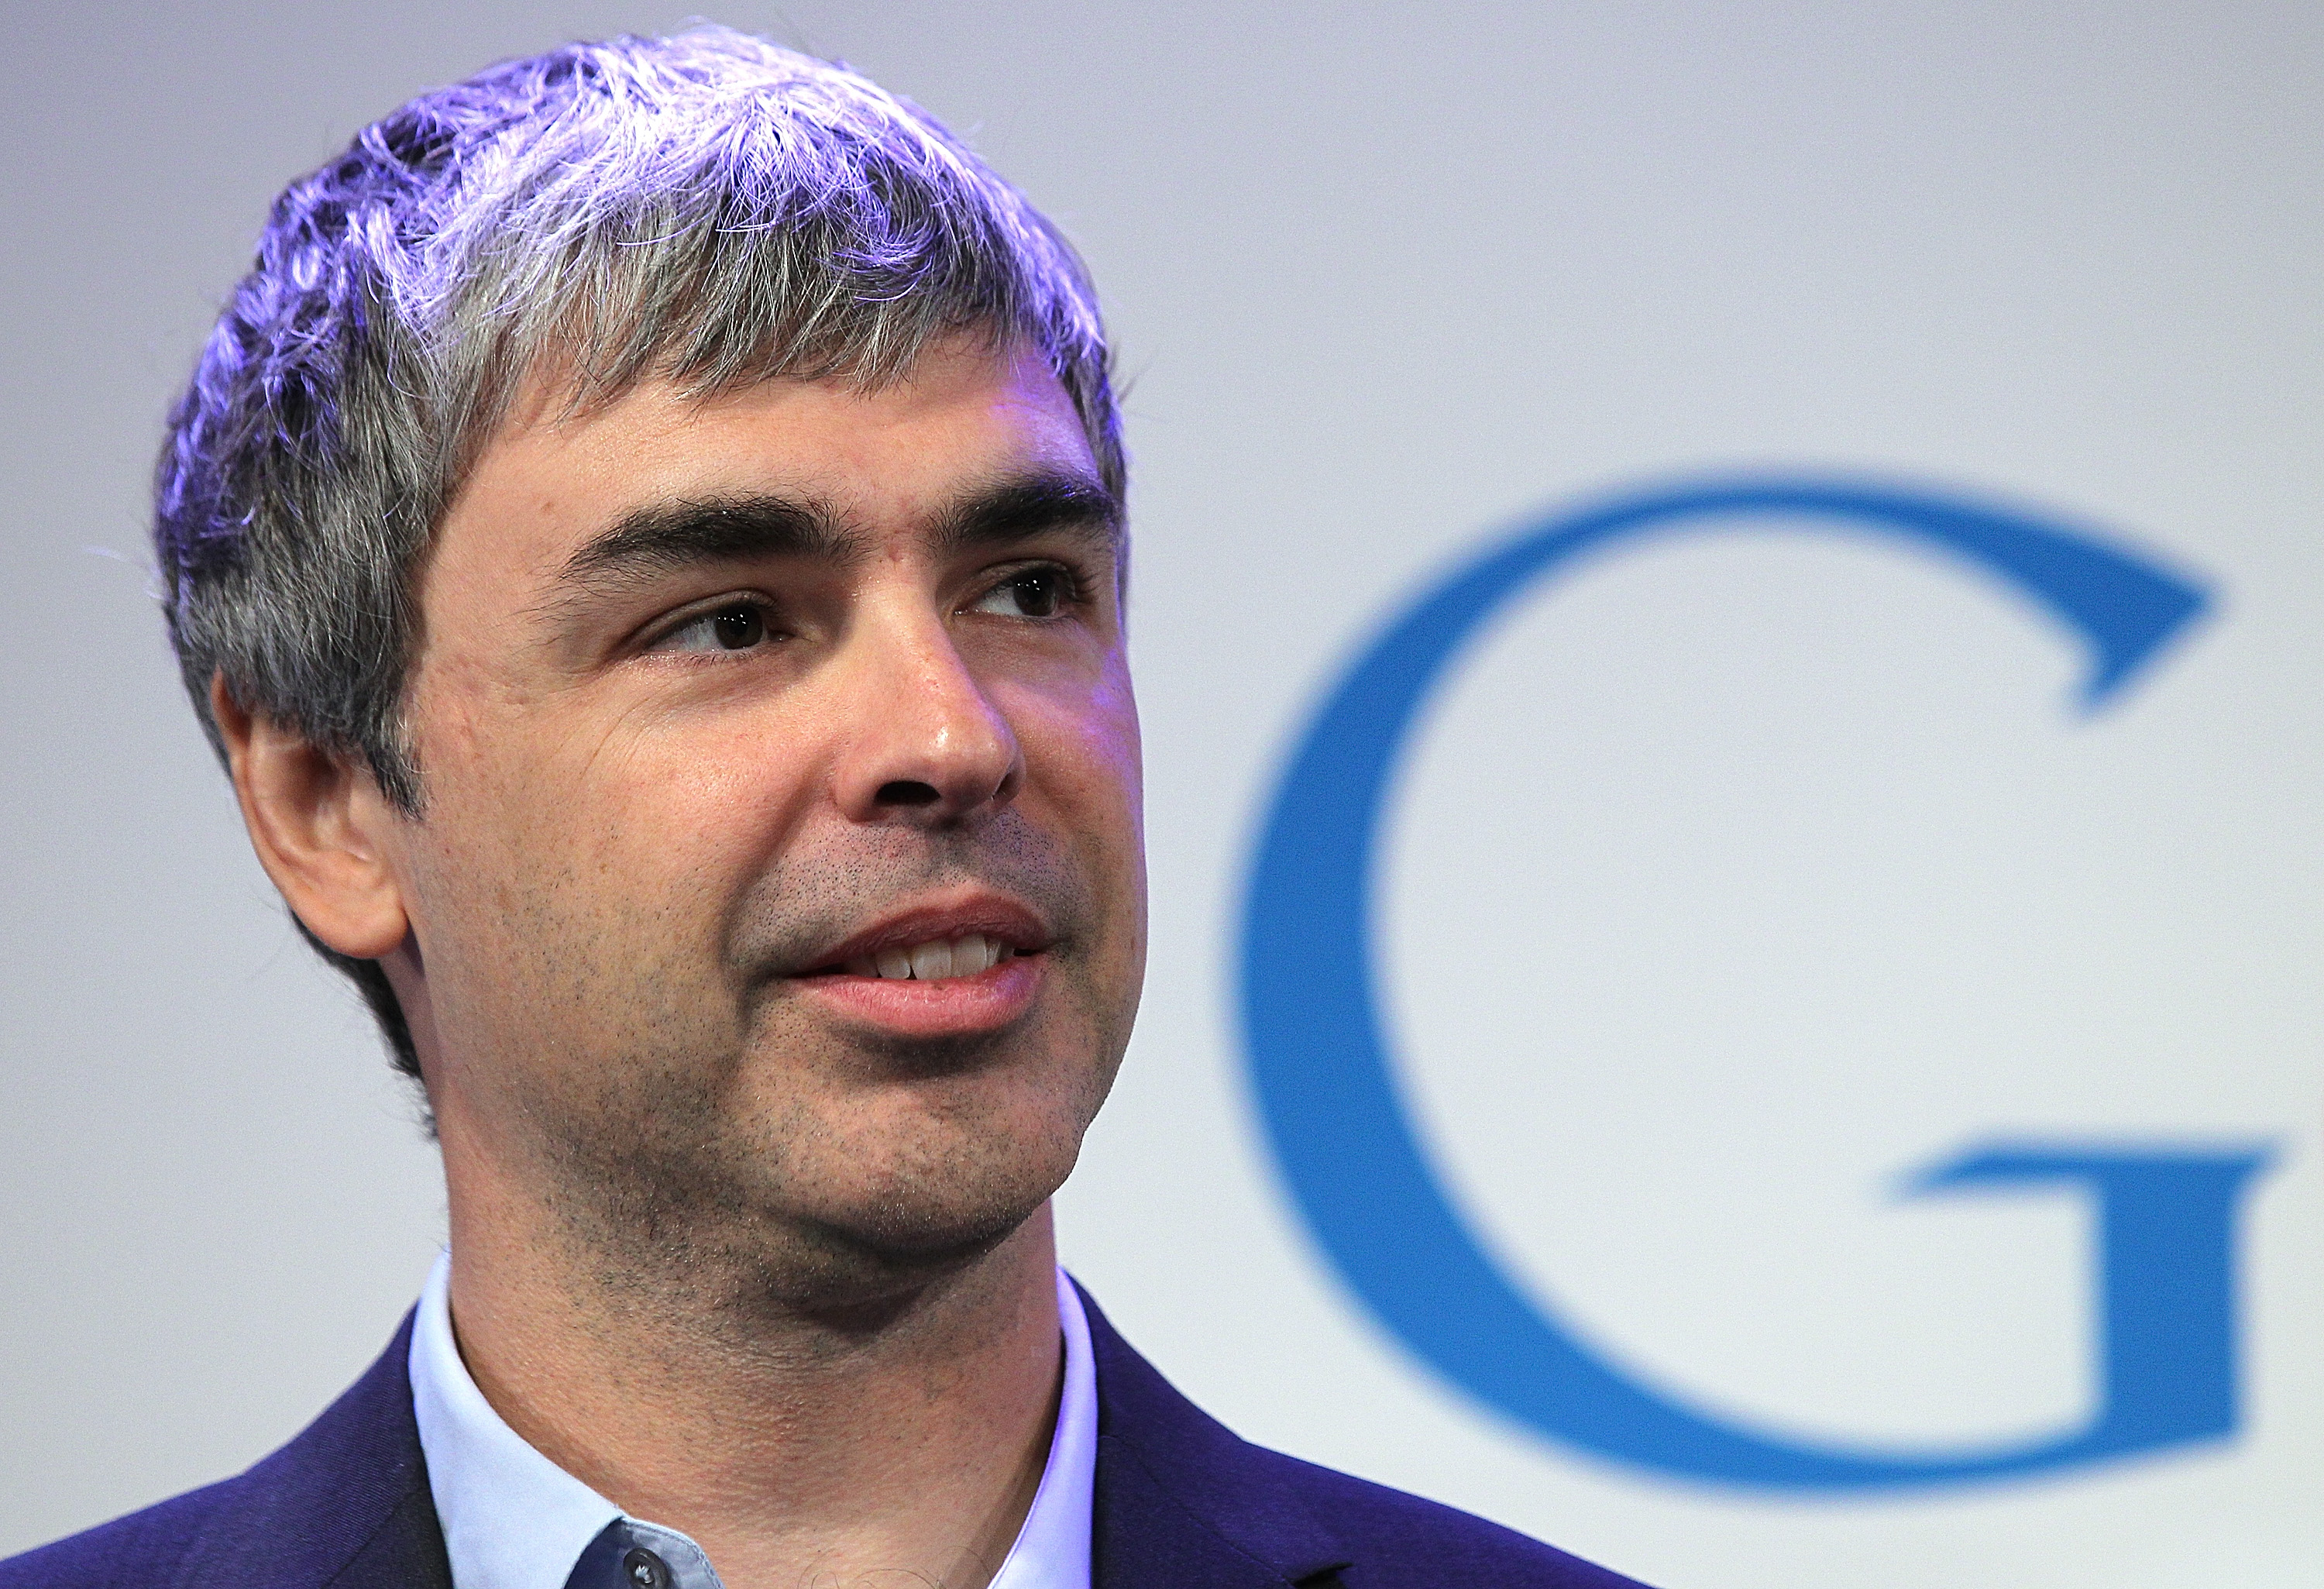 NEW YORK, NY - MAY 21: Google co-founder and CEO Larry Page speaks during a news conference at the Google offices on May 21, 2012 in New York City. Google announced today that it will allocate 22,000 square feet of space in its New York headquarters to CornellNYC Tech while the university completes its new campus on Roosevelt Island. Justin Sullivan/Getty Images/AFP